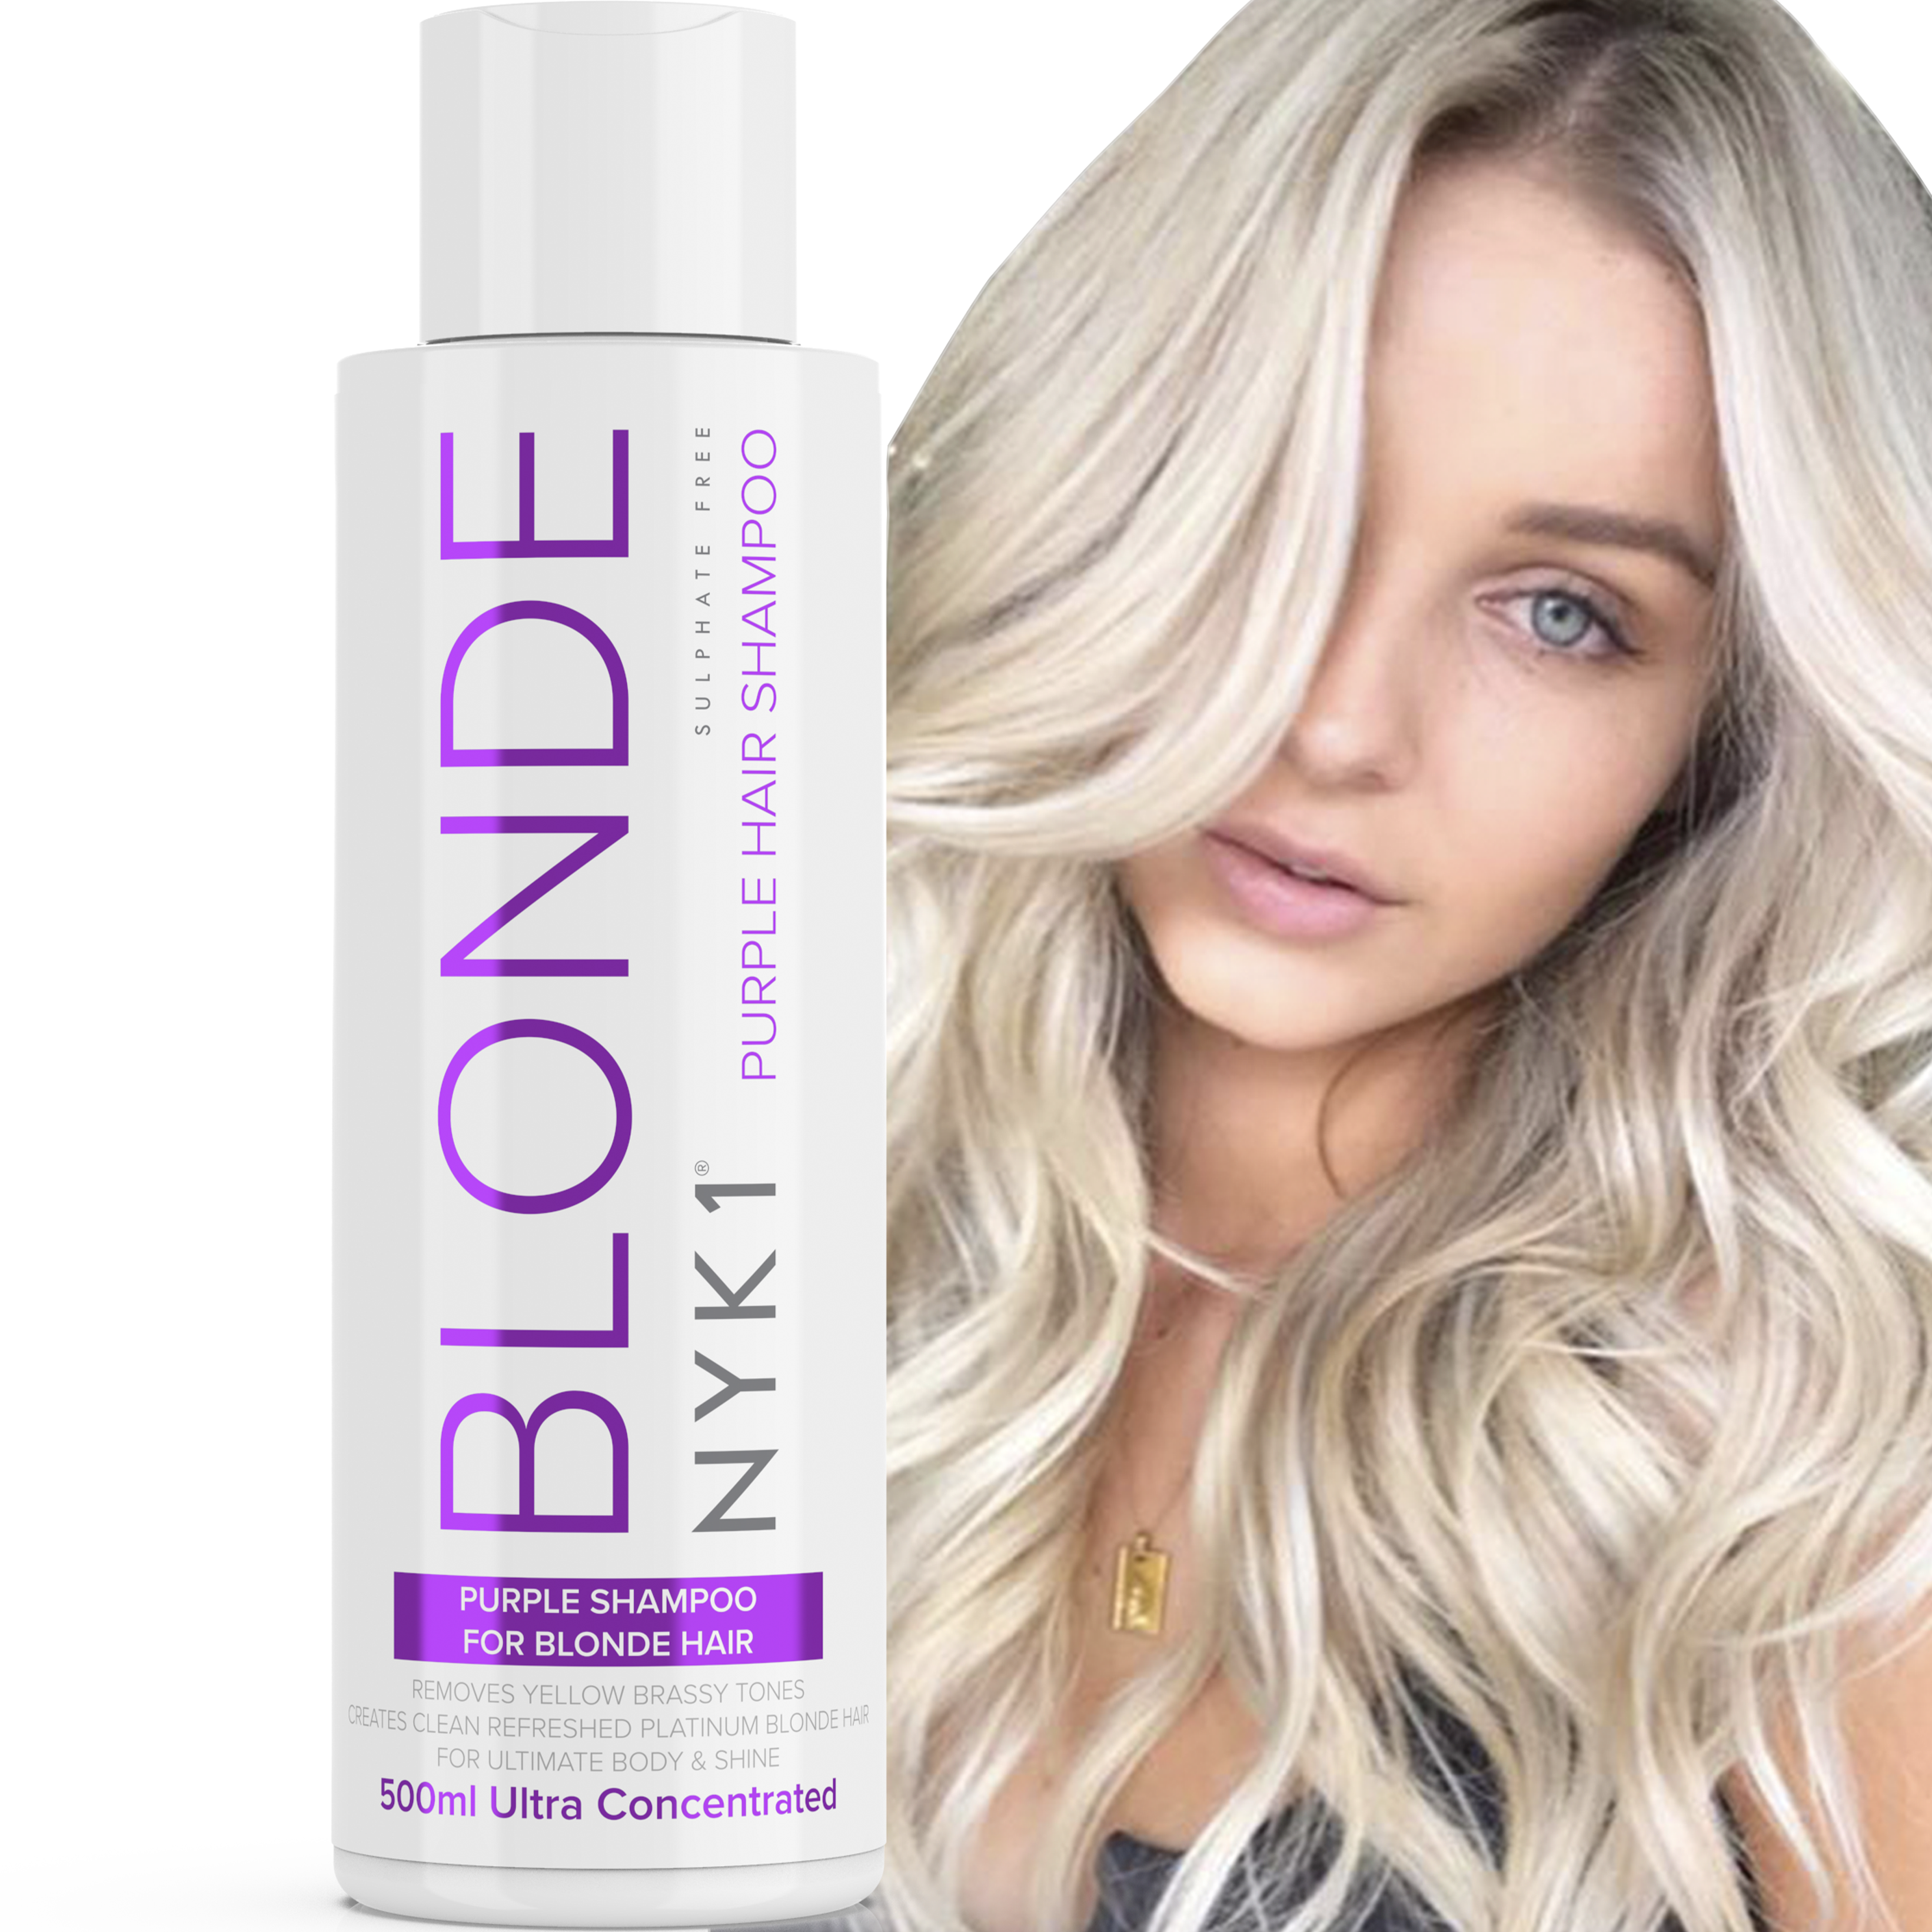 Invitere bølge Forbløffe NYK1 Purple Shampoo & Conditioner For Blonde Hair Sulphate Free